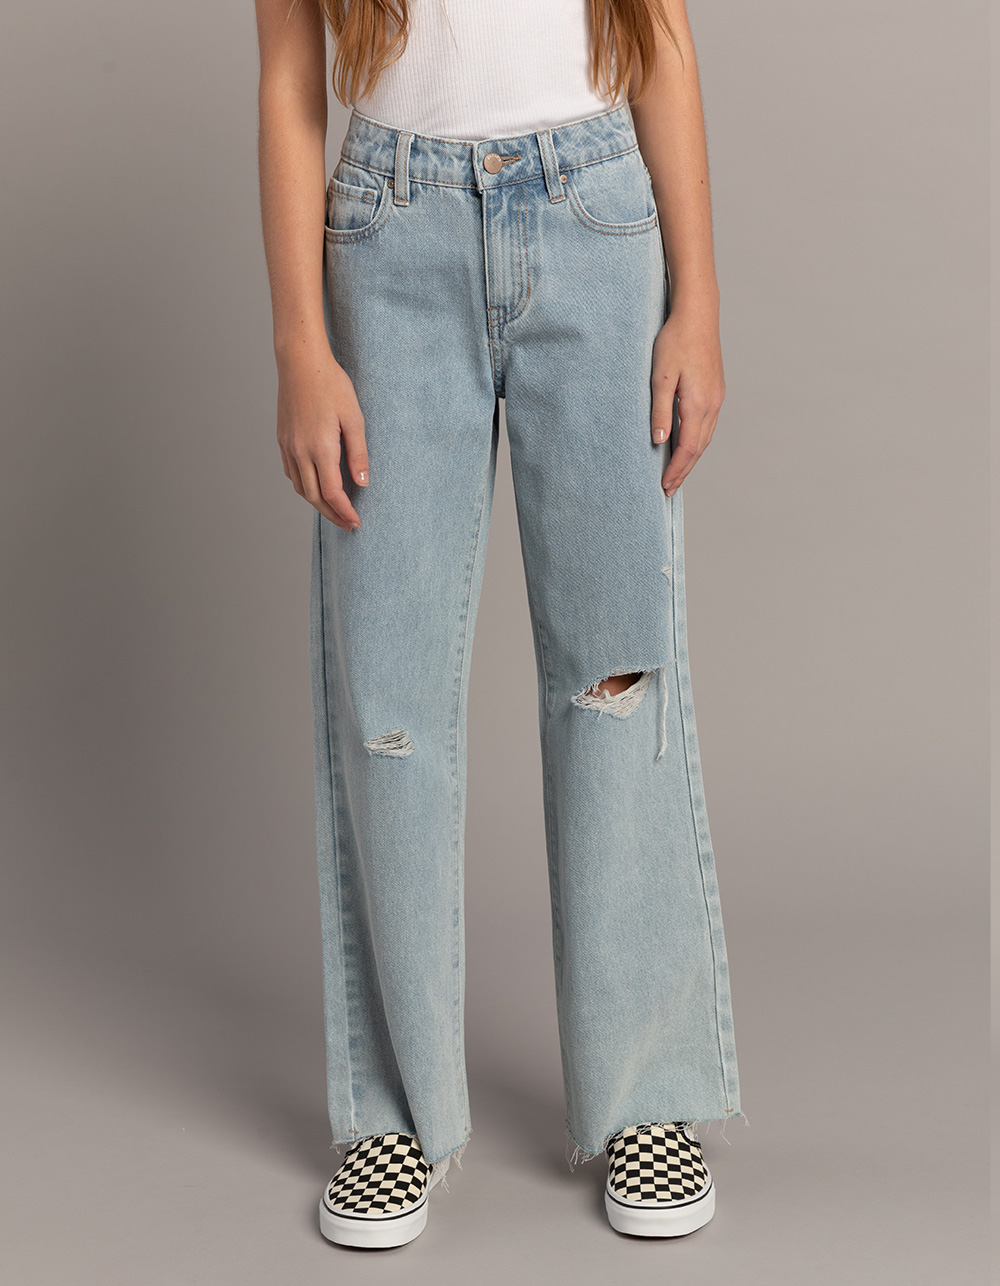 RSQ Girls High Rise Wide Leg Jeans - LIGHT WASH